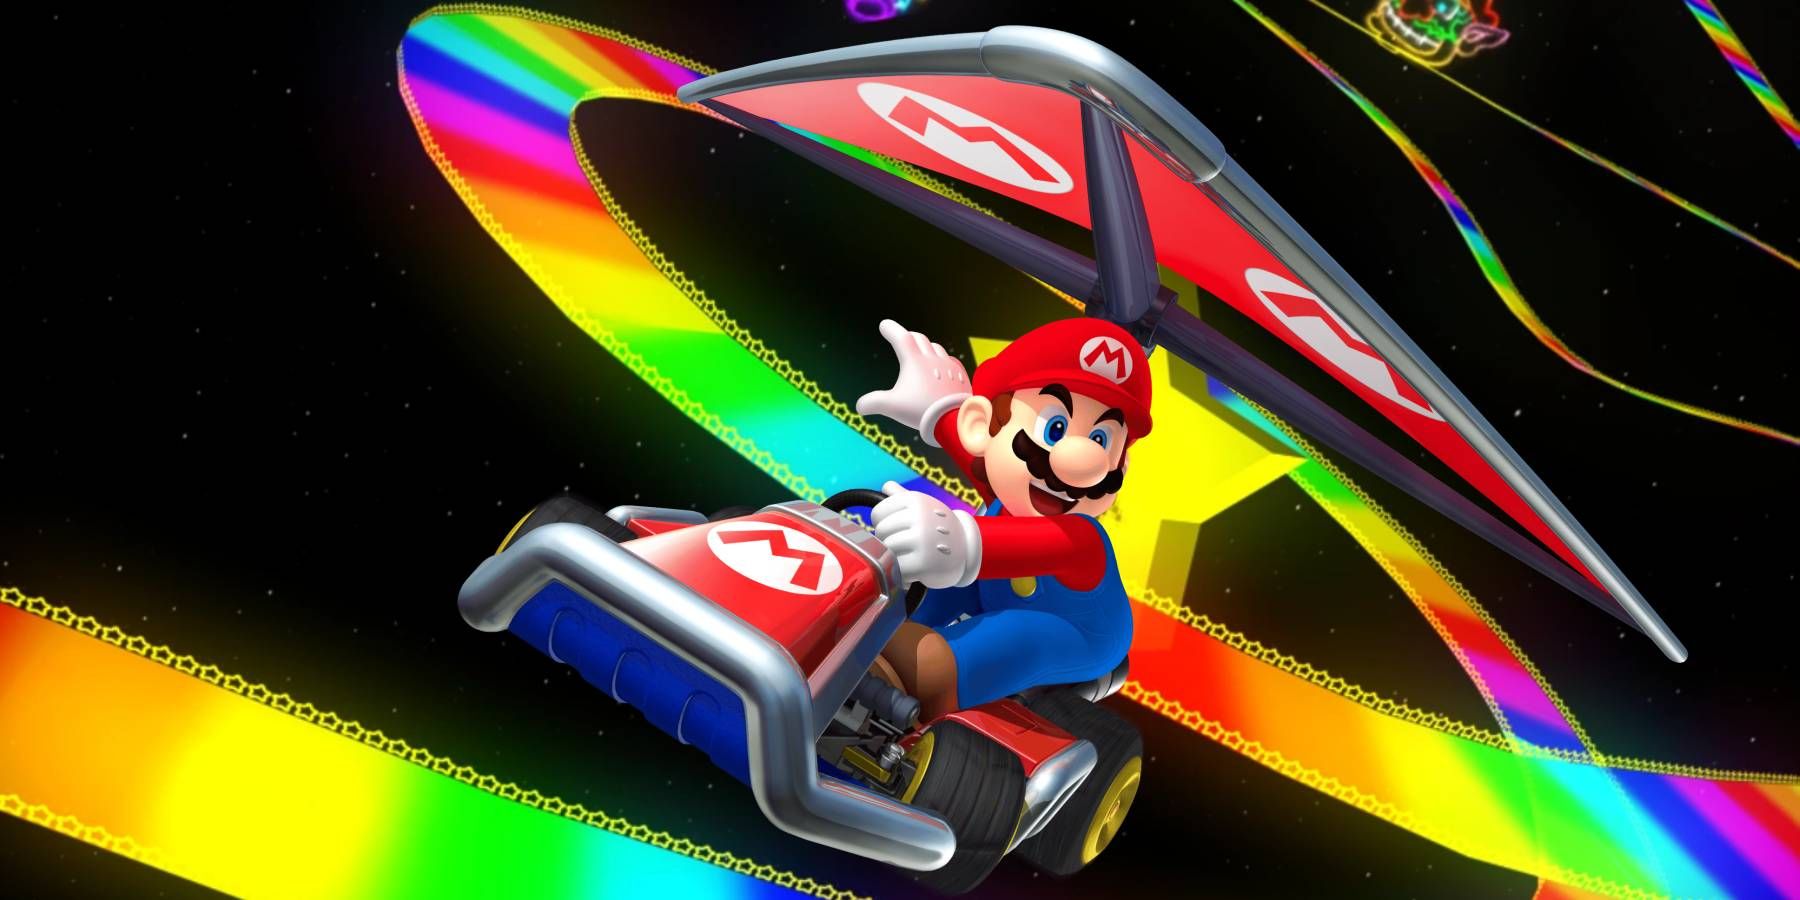 Mario using a glider to fly over Rainbow Road from Mario Kart 64